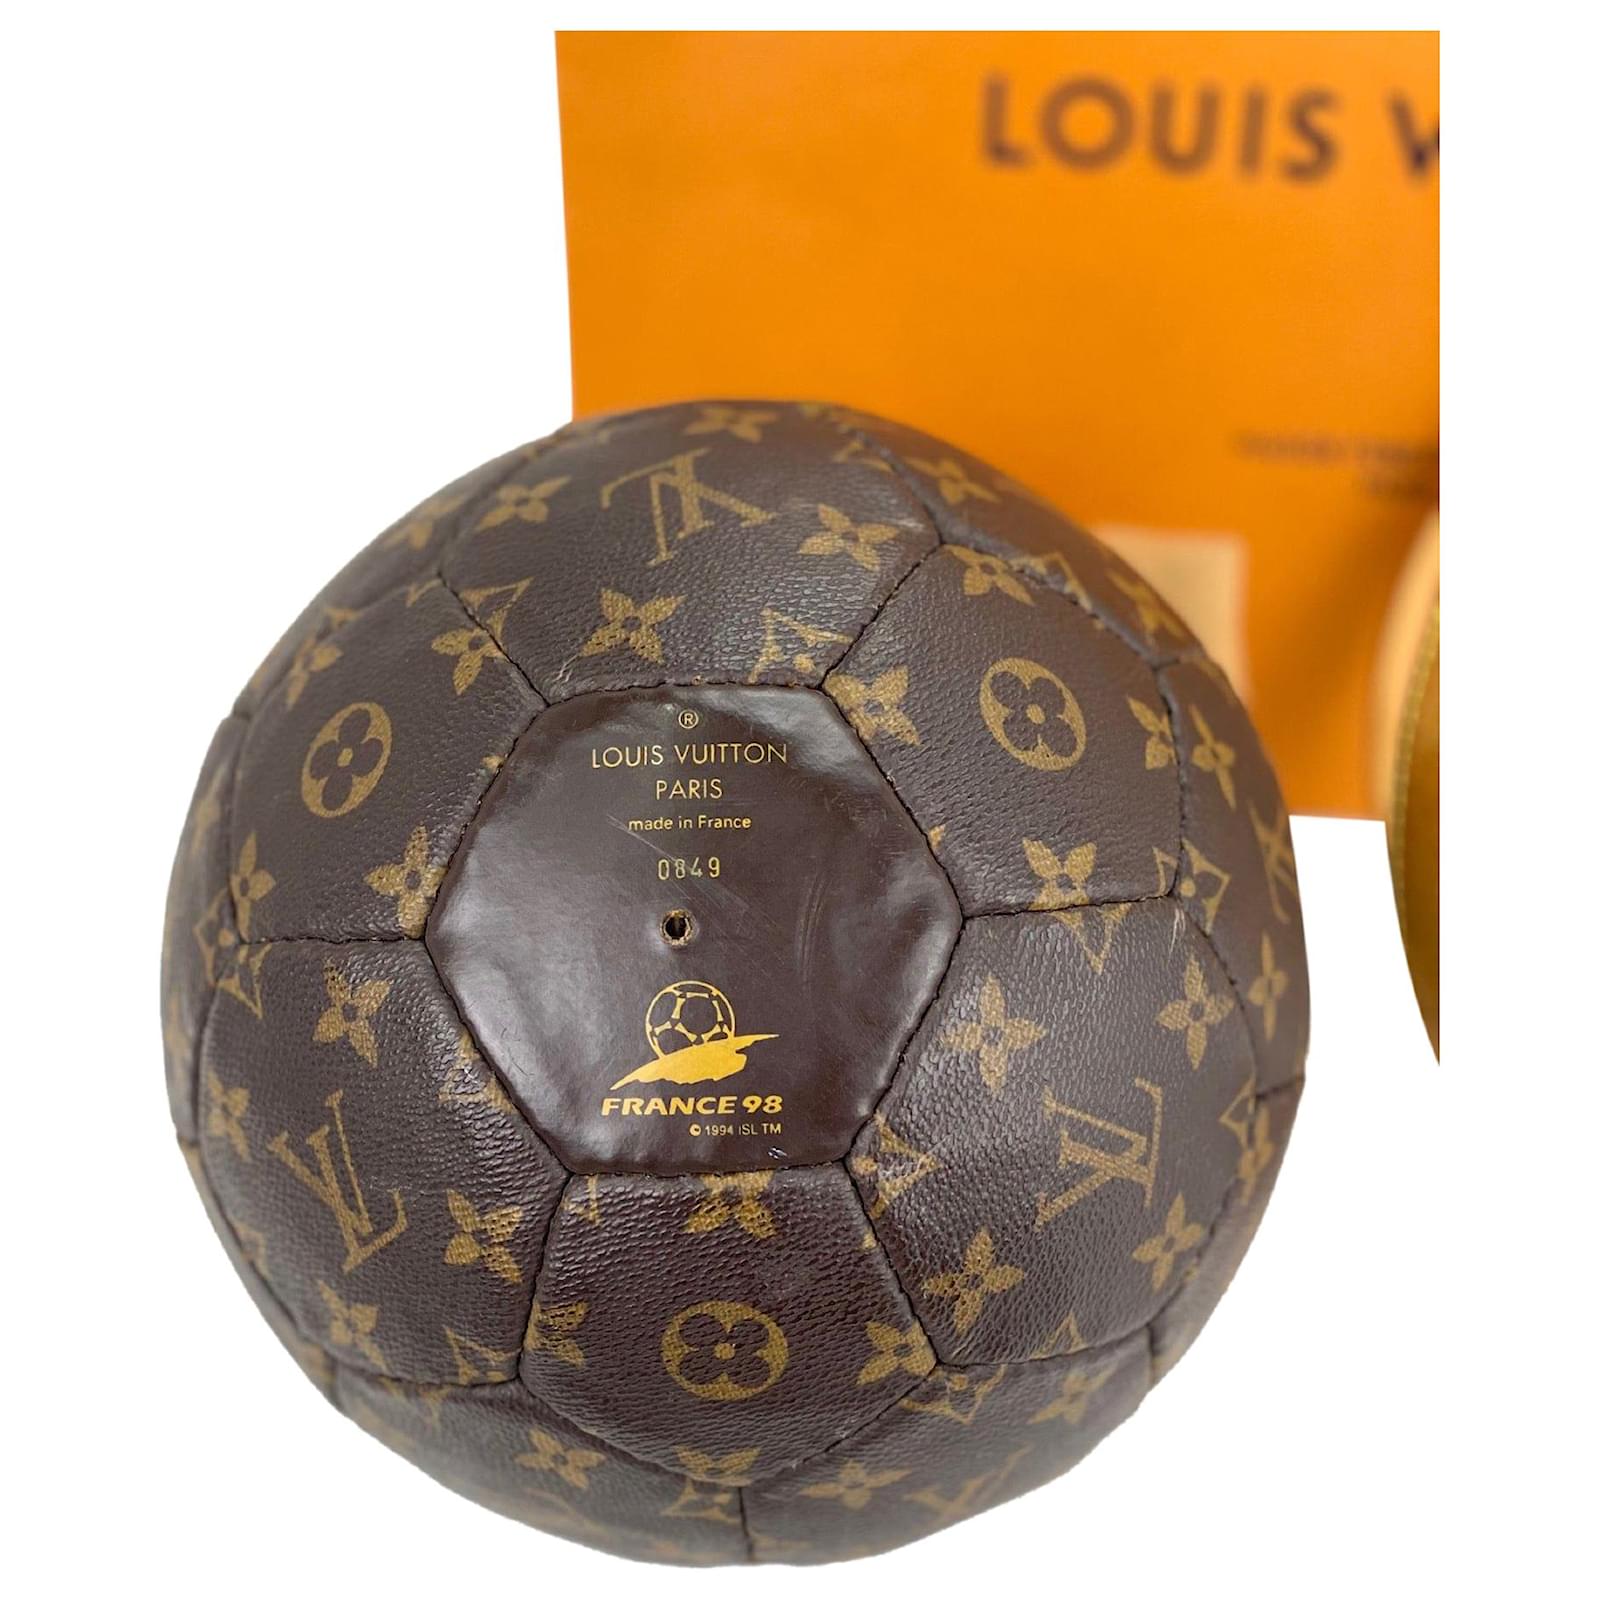 LOUIS VUITTON Limited Edition FIFA Monogram SOCCER FOOTBALL 1998 WORLD CUP  Preowned